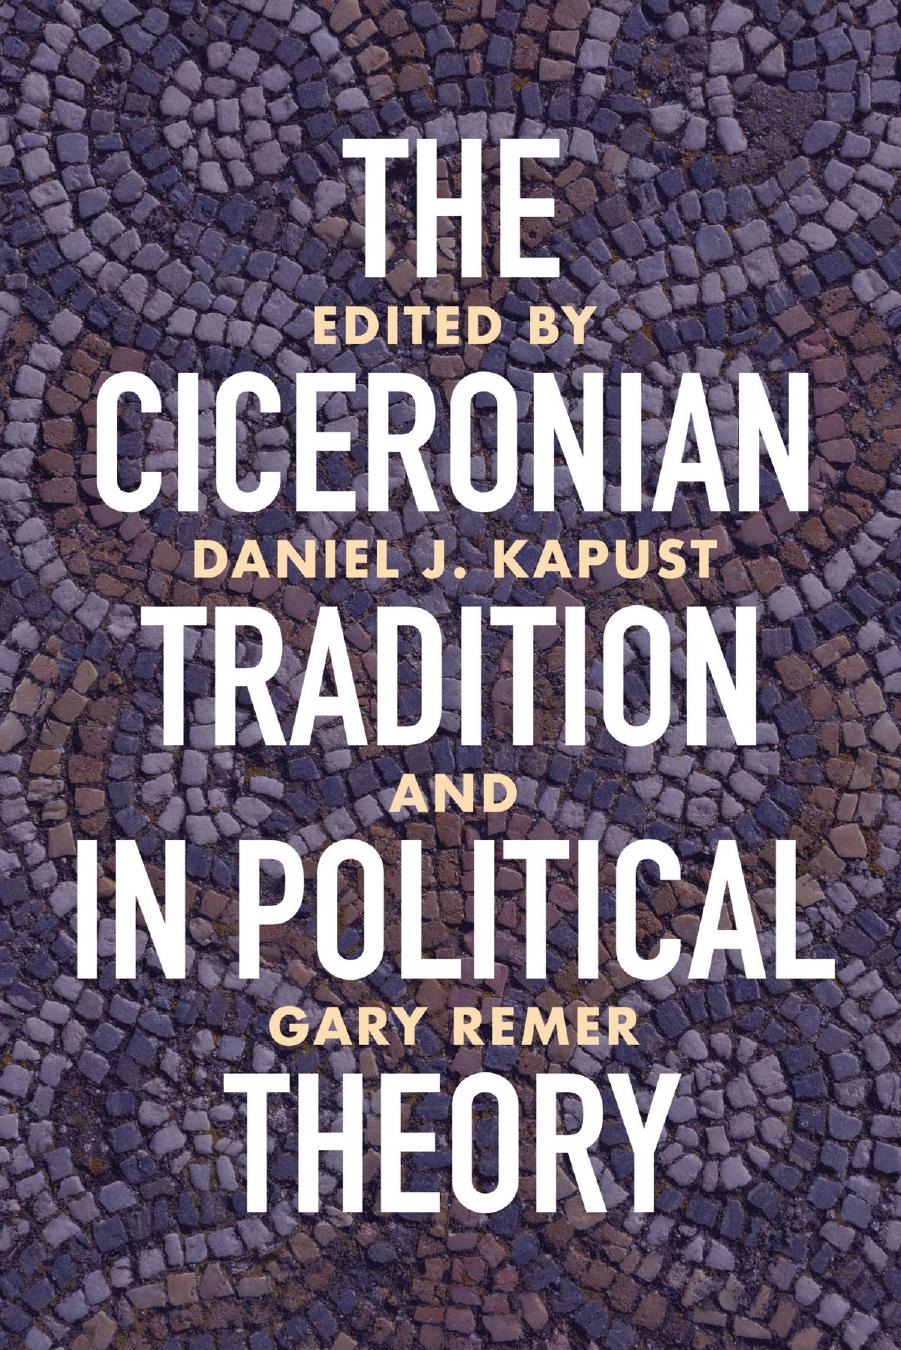 The Ciceronian Tradition in Political Theory by Daniel J. Kapust; Gary Remer